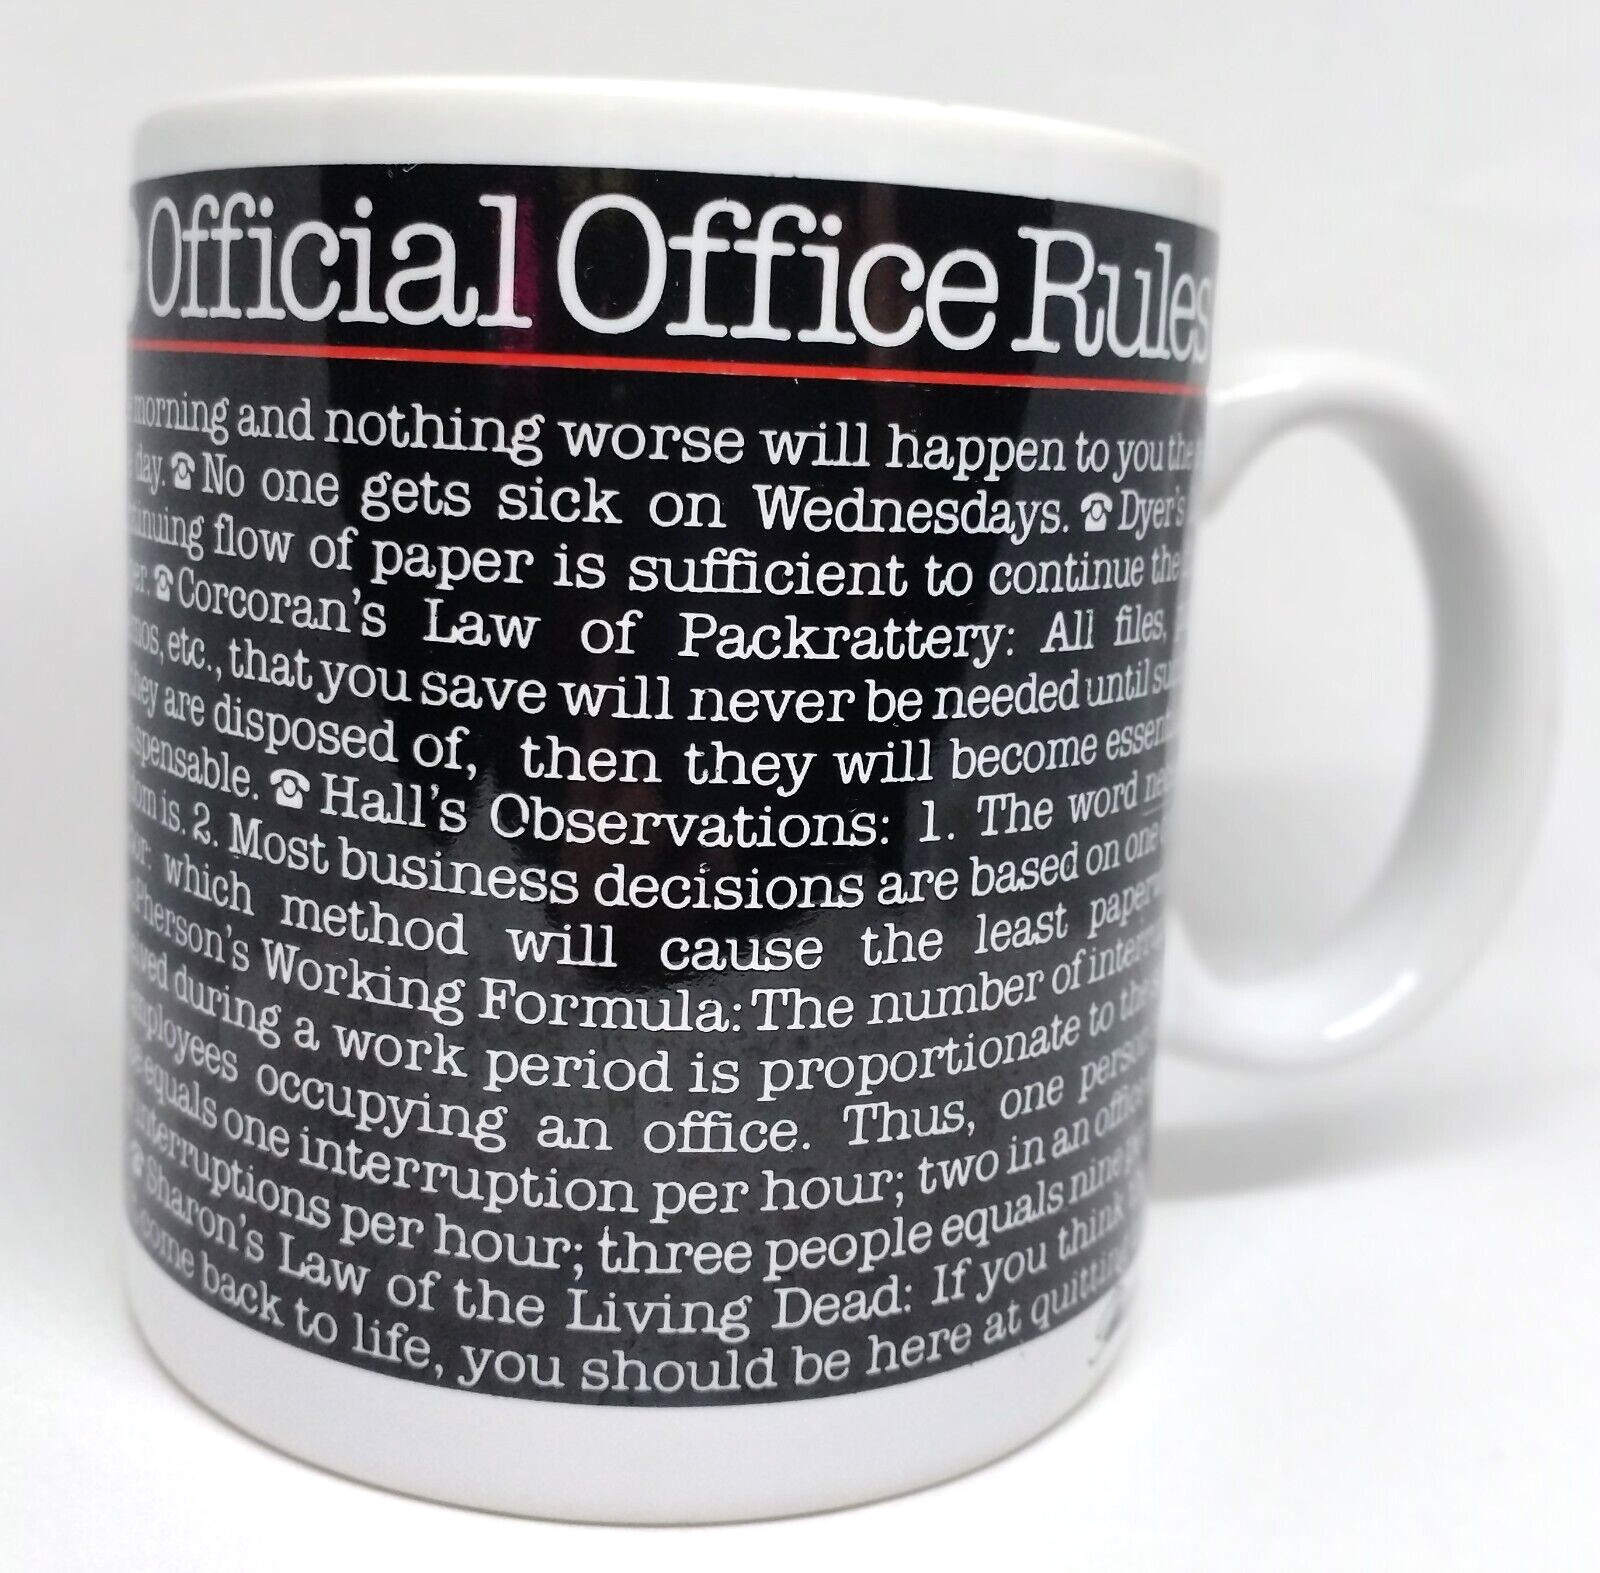 Vintage 1983 Official Office Rules Coffee Mug Toscany Japan